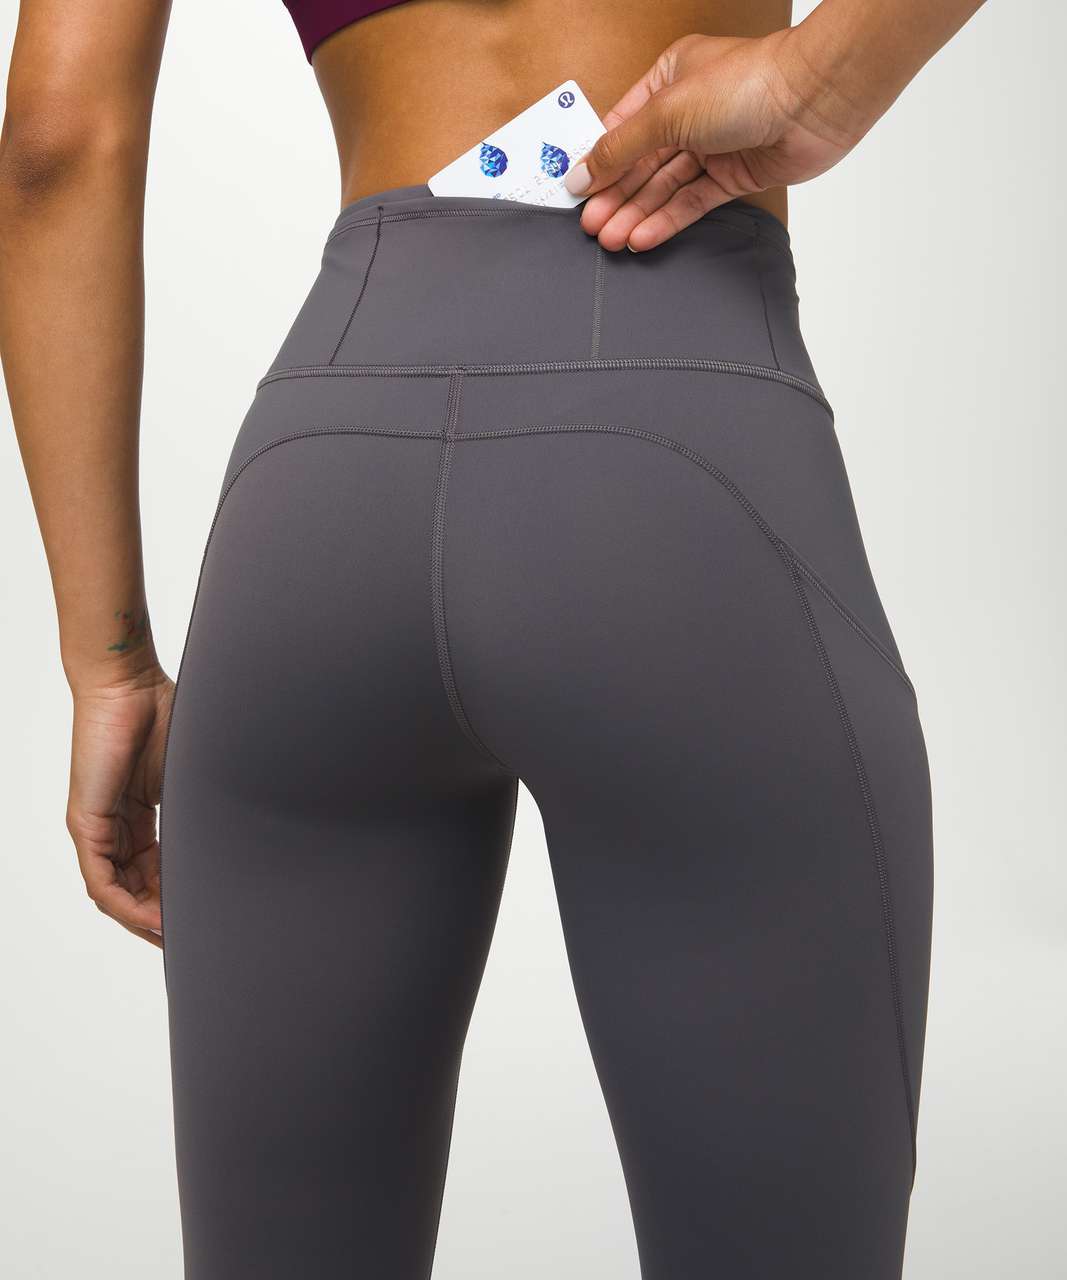 Lululemon Fast and Free Tight II 25" *Non-Reflective Nulux - Titanium